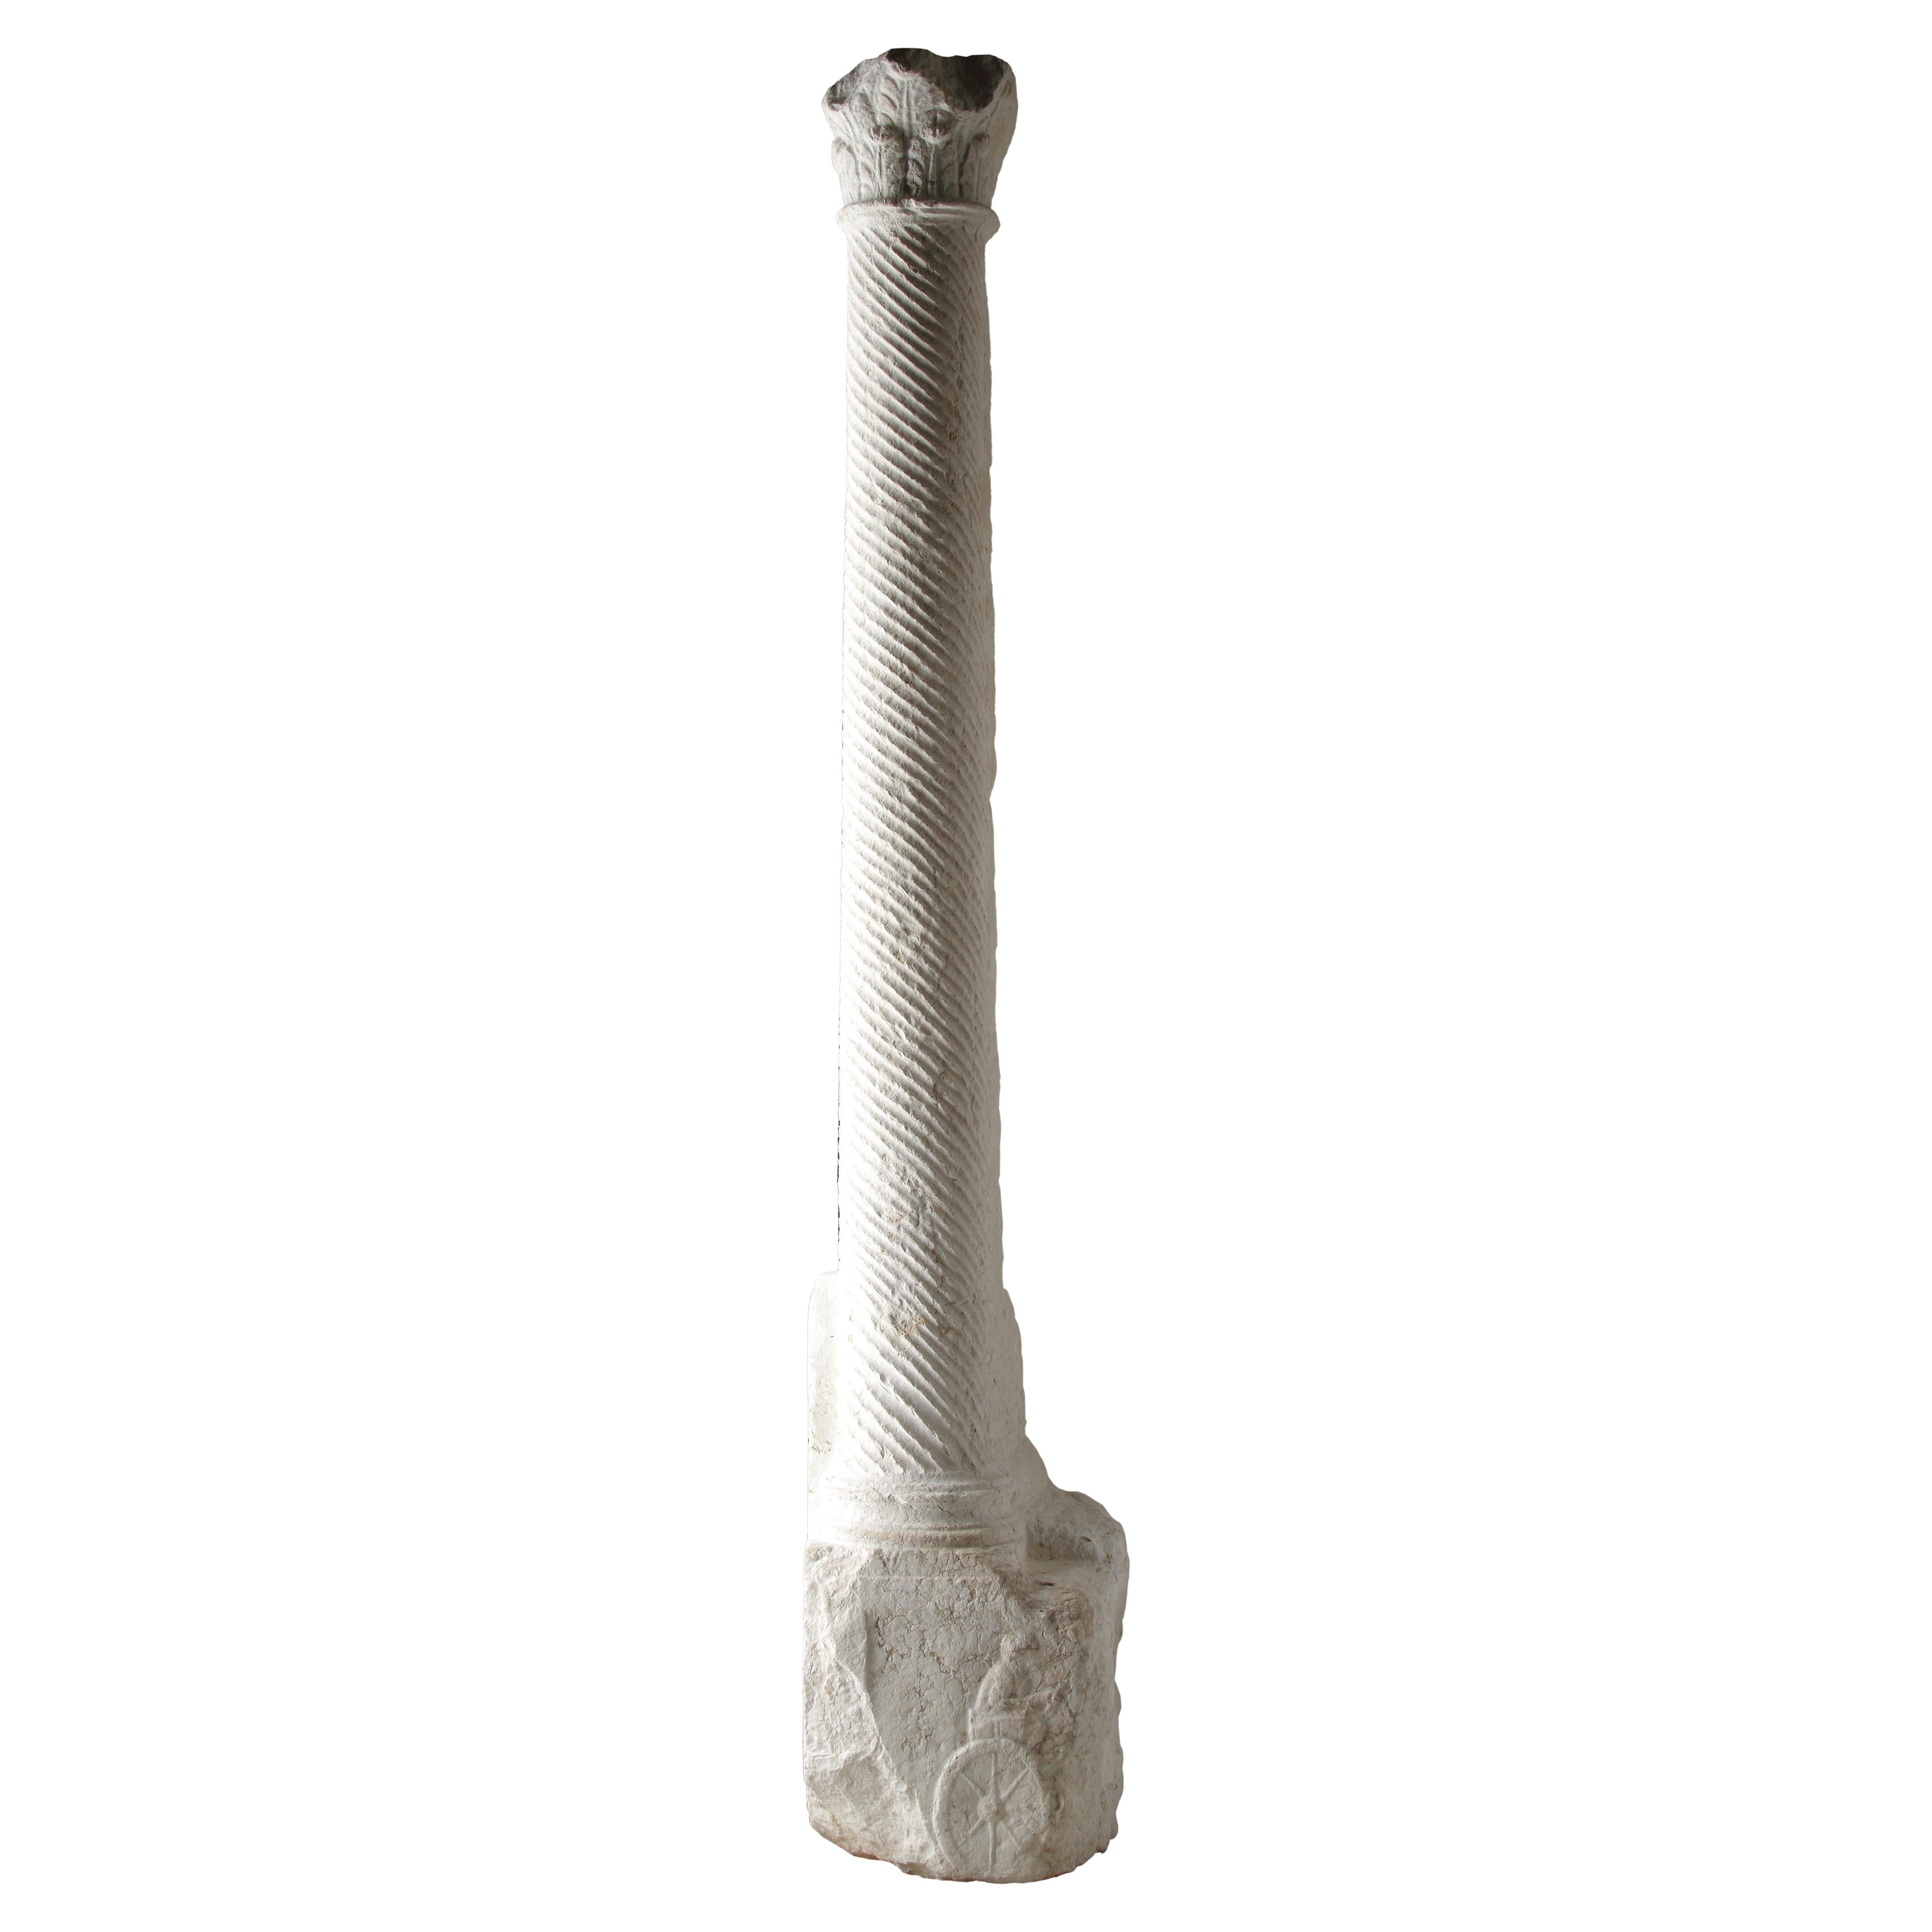 A Rare and Important Late Roman Marble Column For Sale